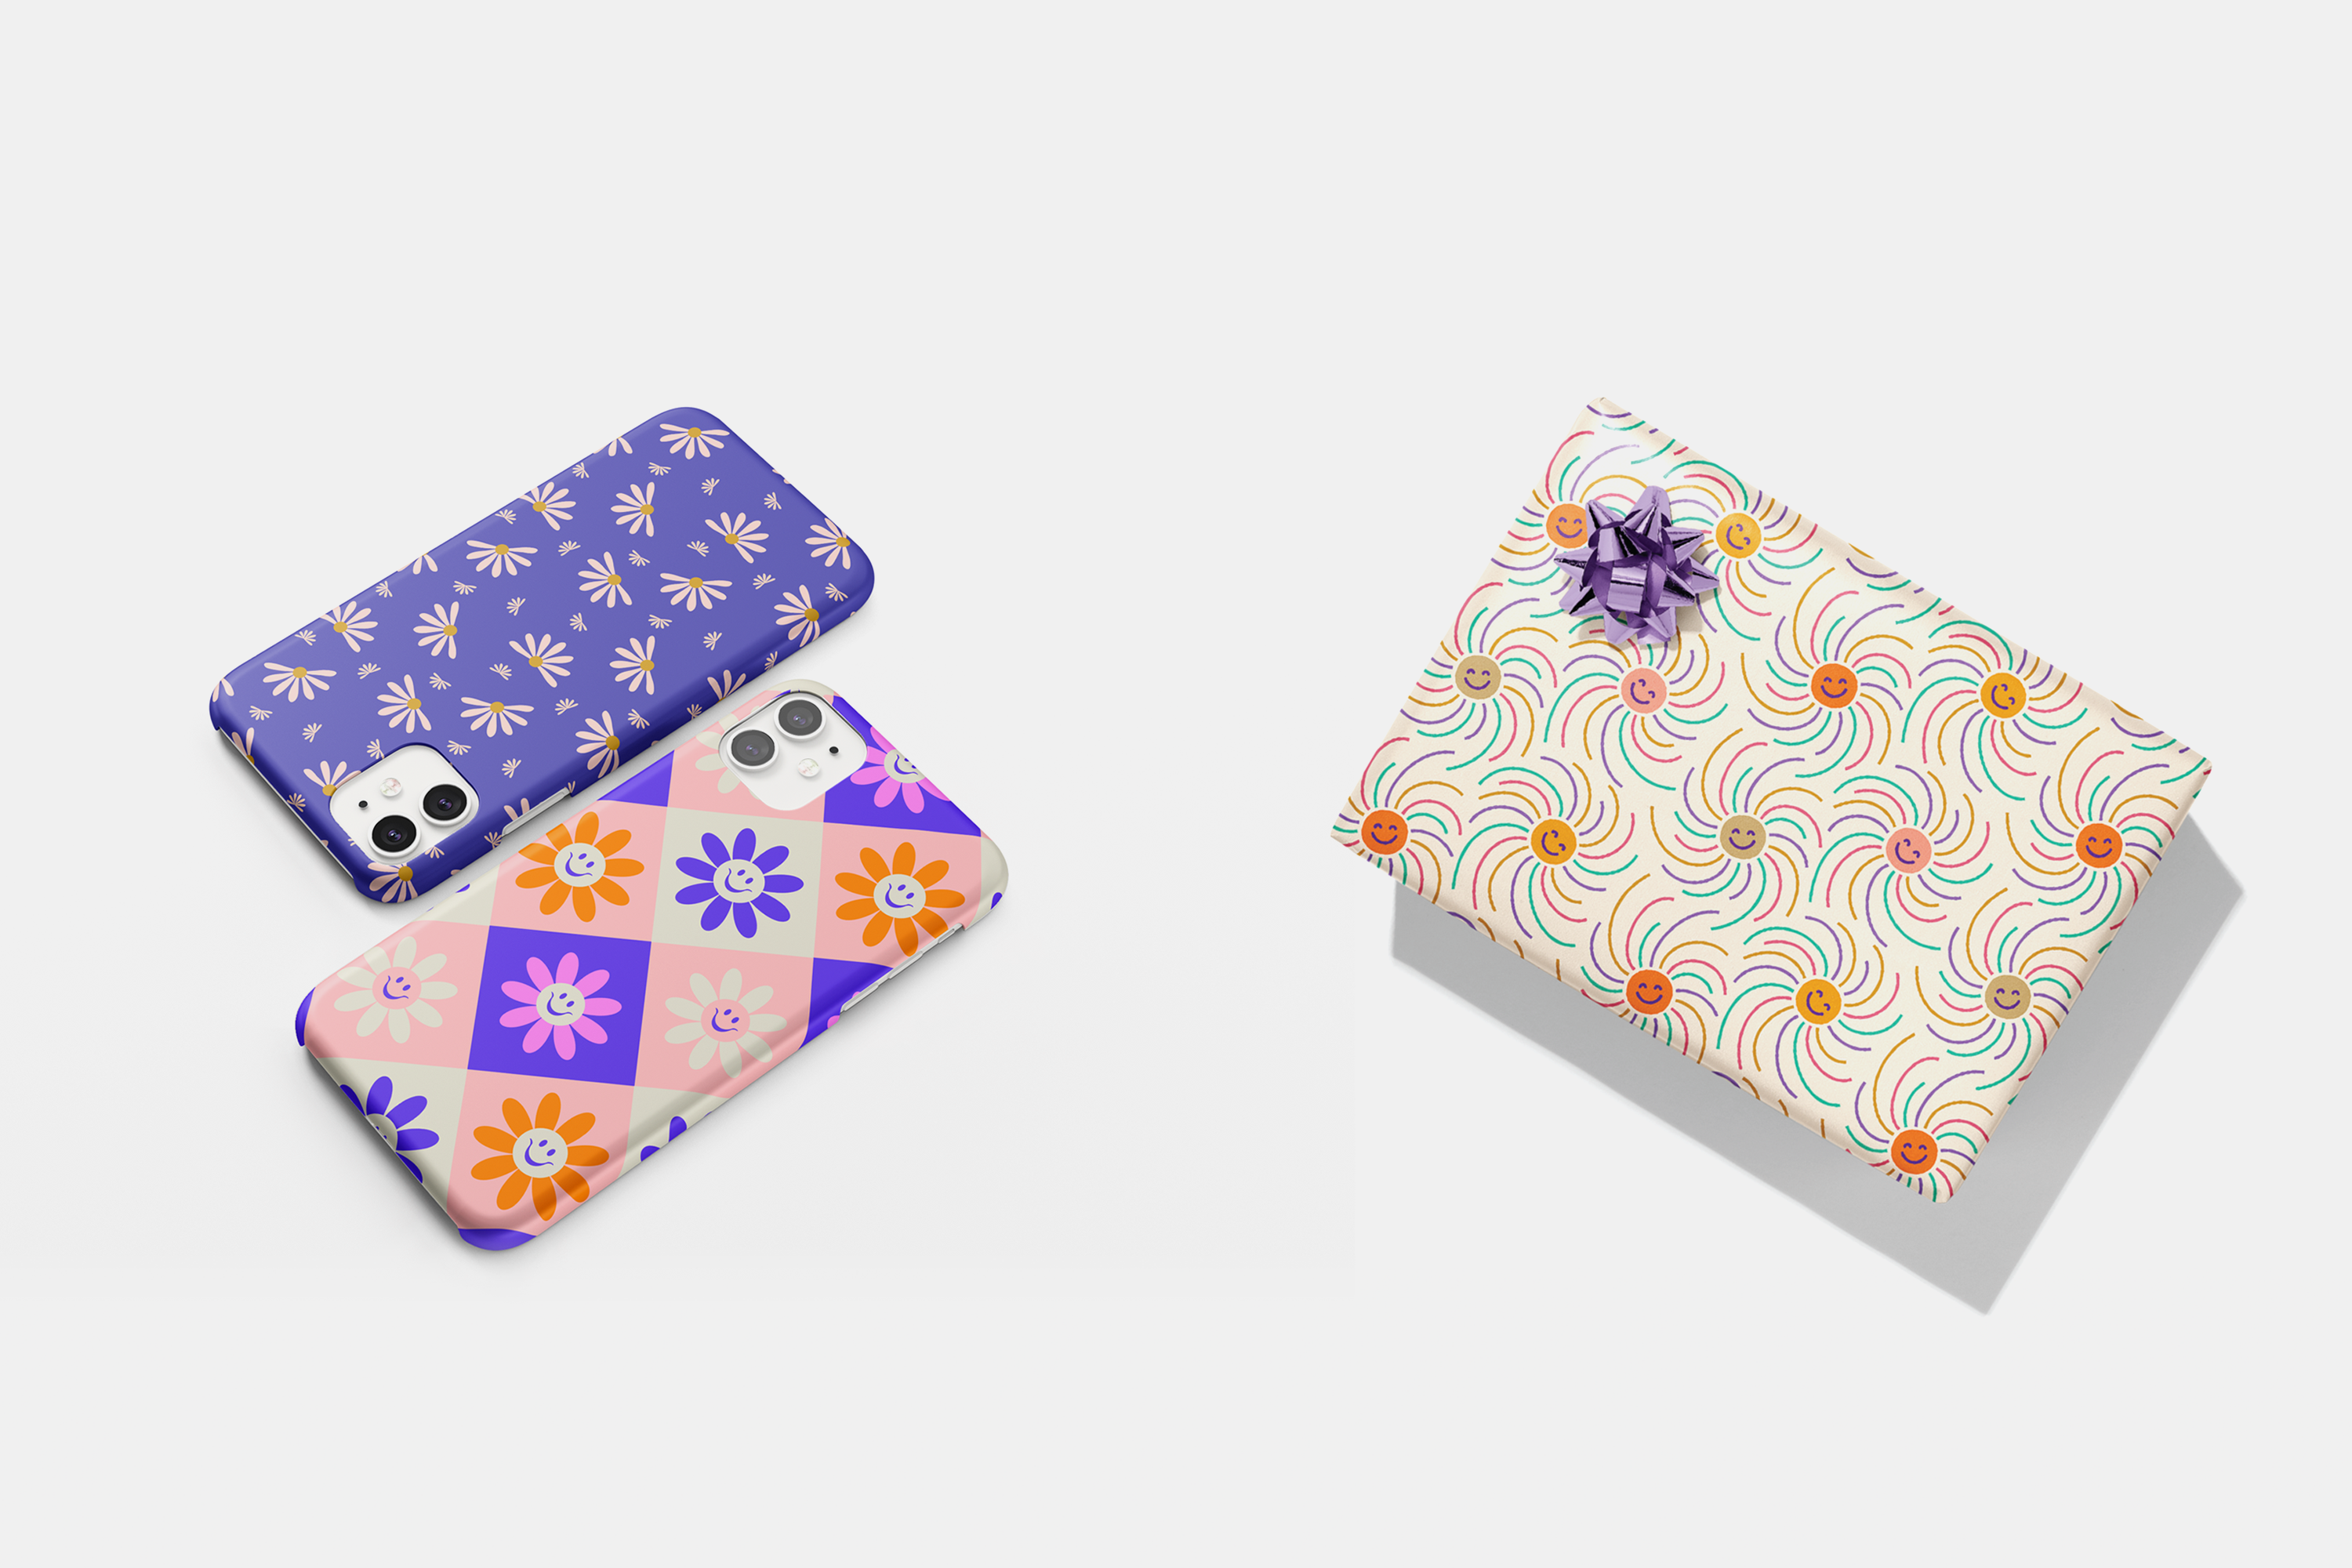 Elivera Designs phone cases and gift wrapping paper with smiley pattern, floral daisy pattern and happy smiley faces